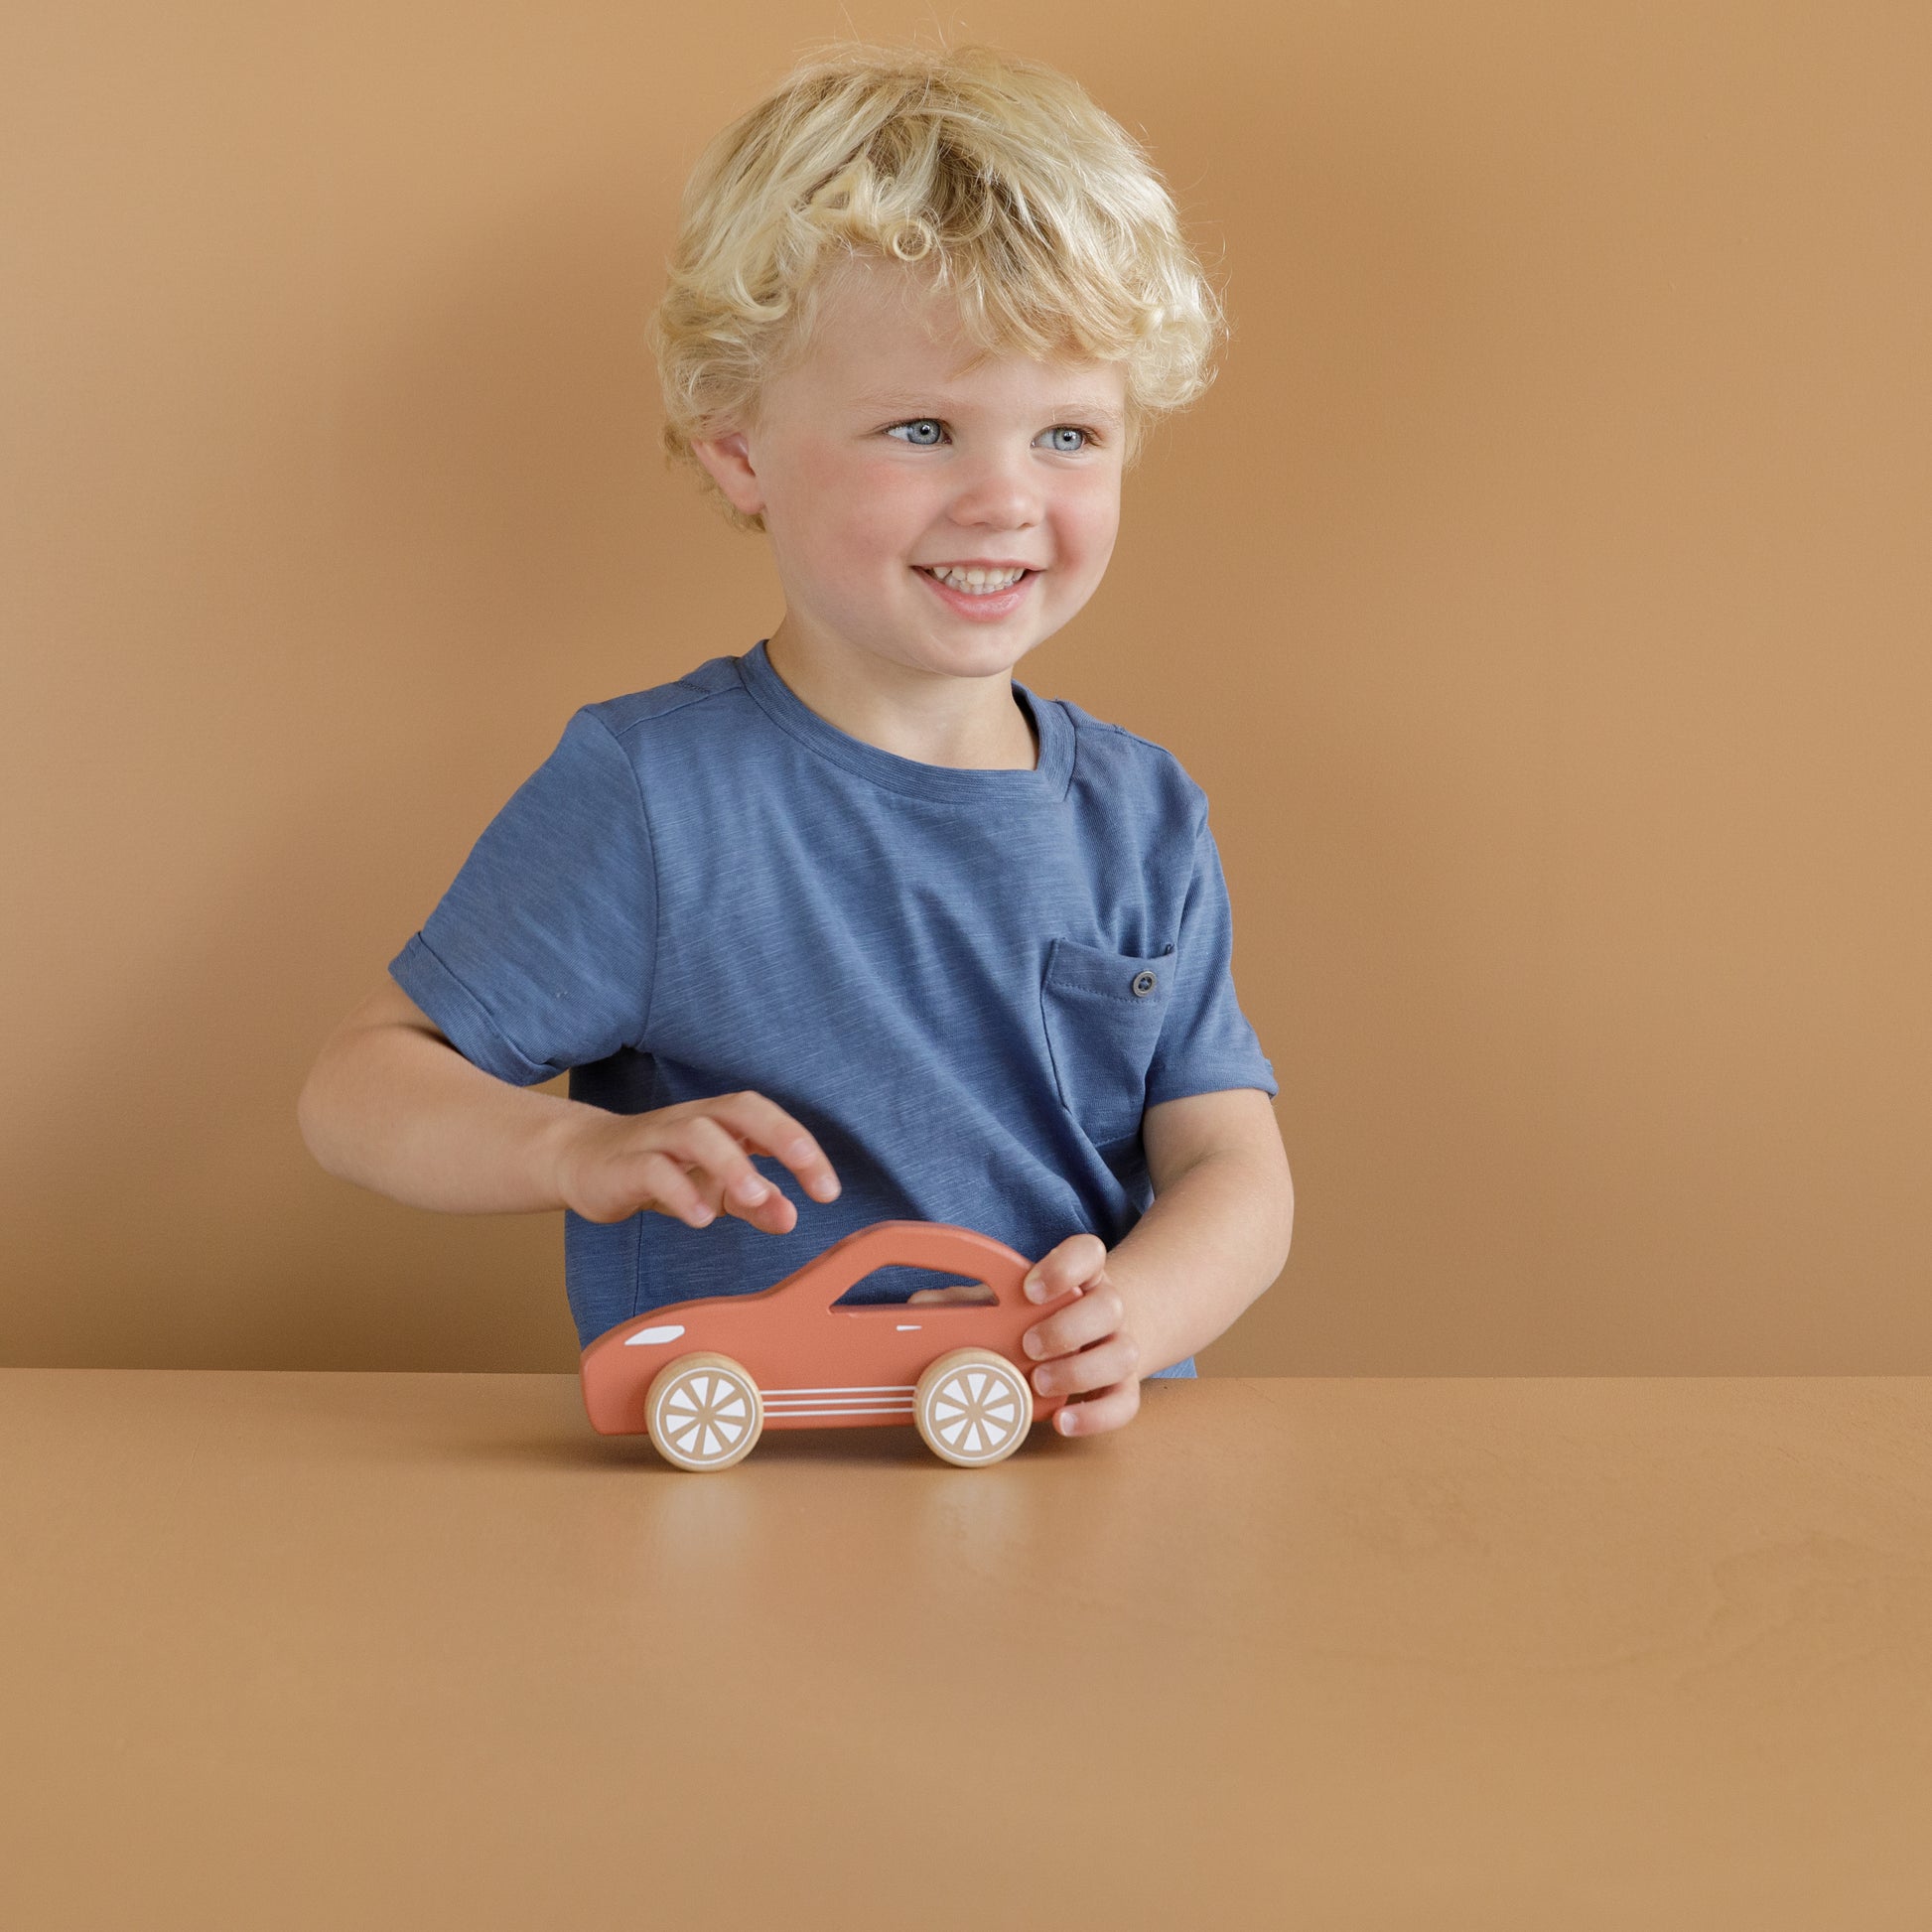 Child playing with Little Dutch wooden red sports car